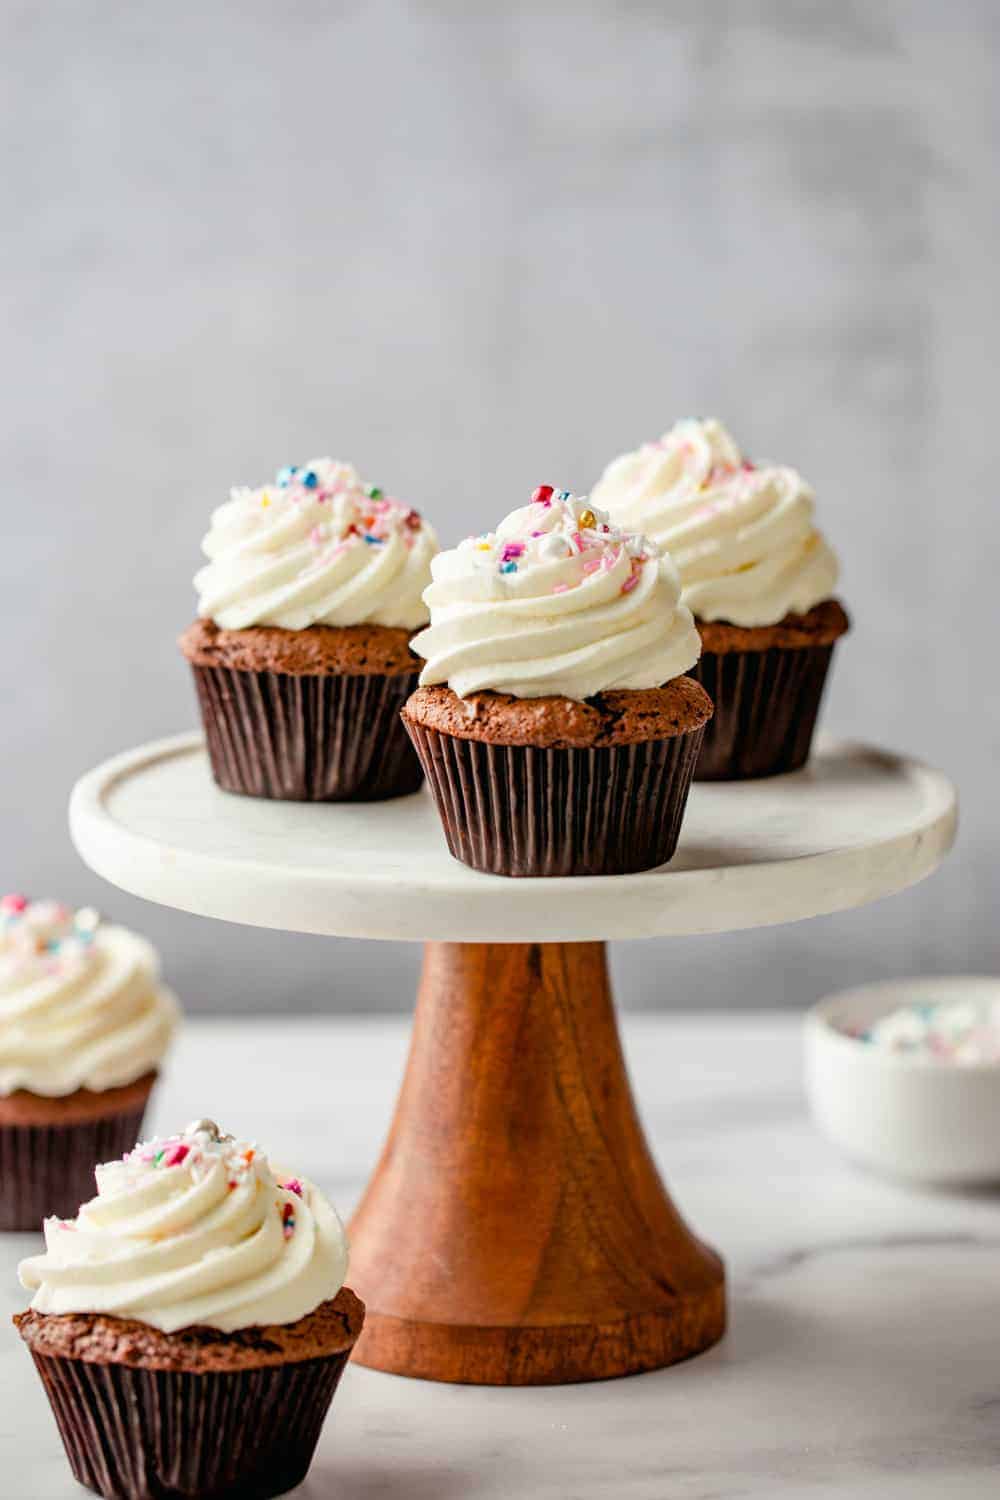 Doctored Cake Mix is an easy way to make a cake mix extra special. Don’t let anyone tell you that you can’t get from-scratch flavor from a boxed mix!